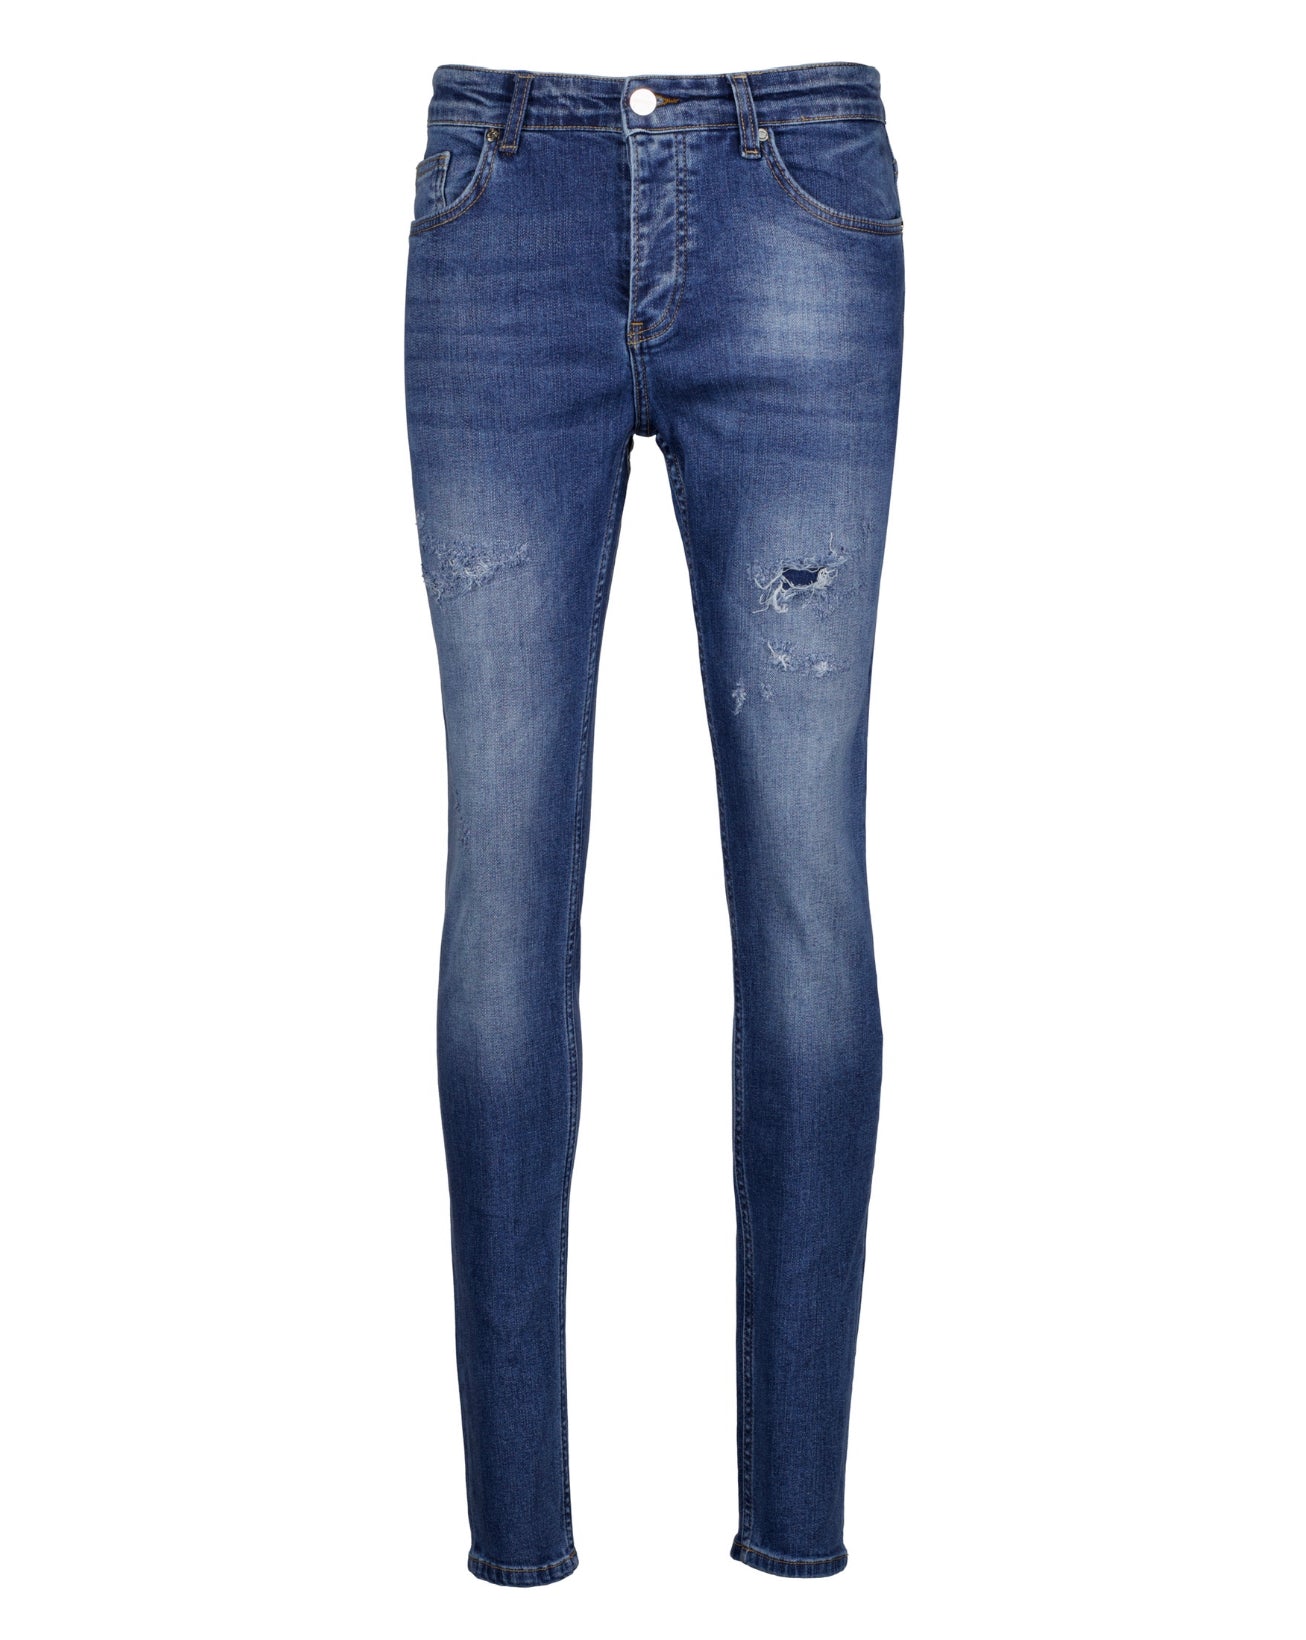 The Renato Light Blue Ripped Jeans - Jeans by Urbbana